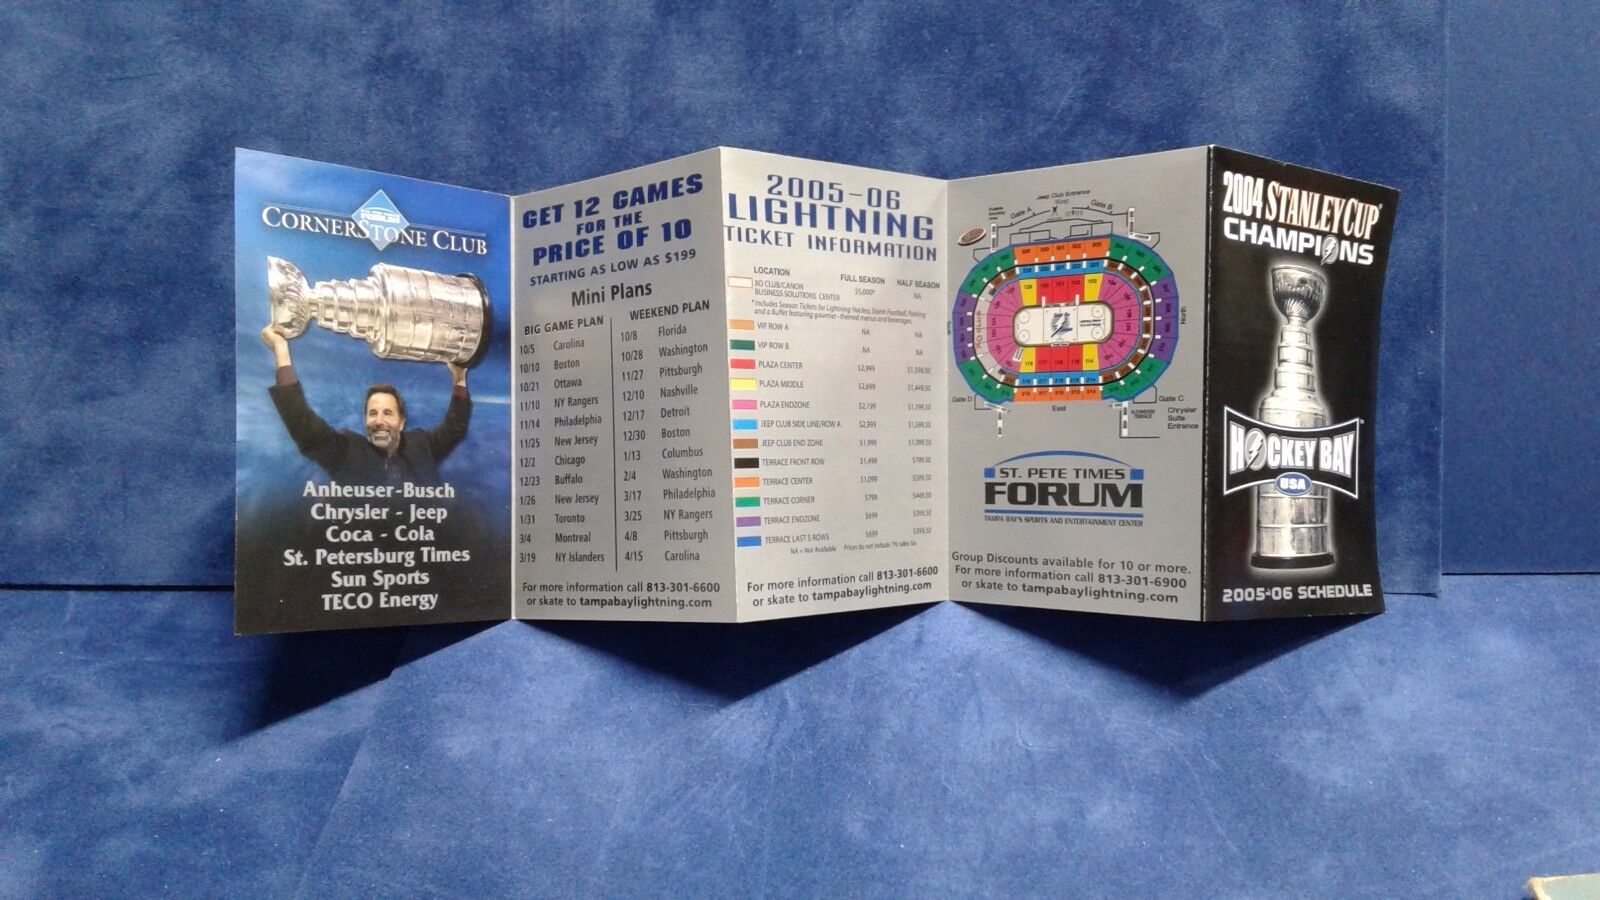 Tampa Bay Lightning  Pocket Schedule Lot of 2 05-06 2004 Stanley Cup Champions